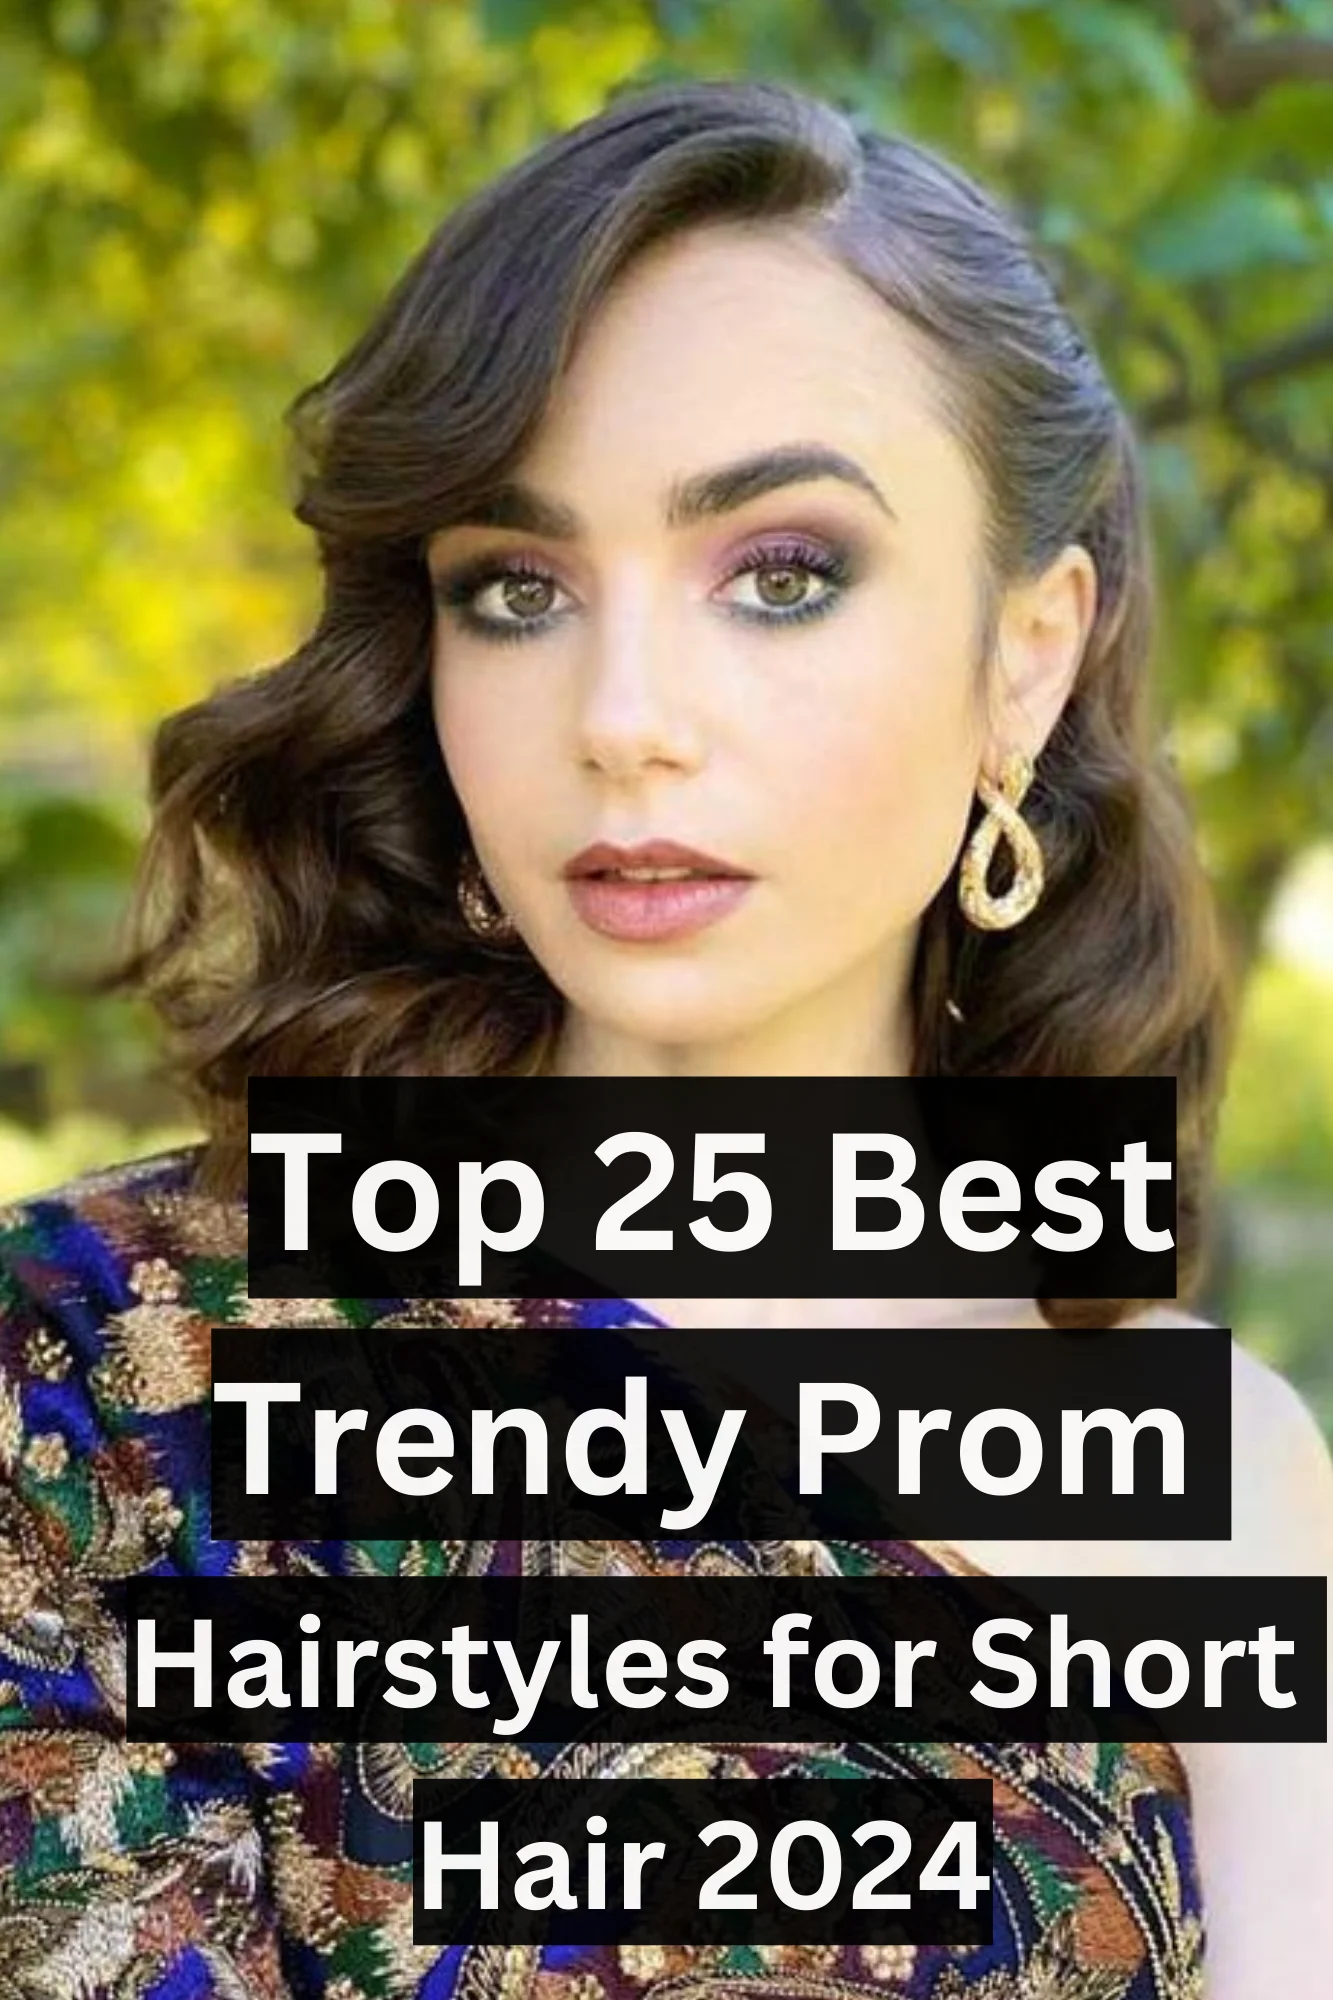 Prom Hairstyles for Short Hair 2024